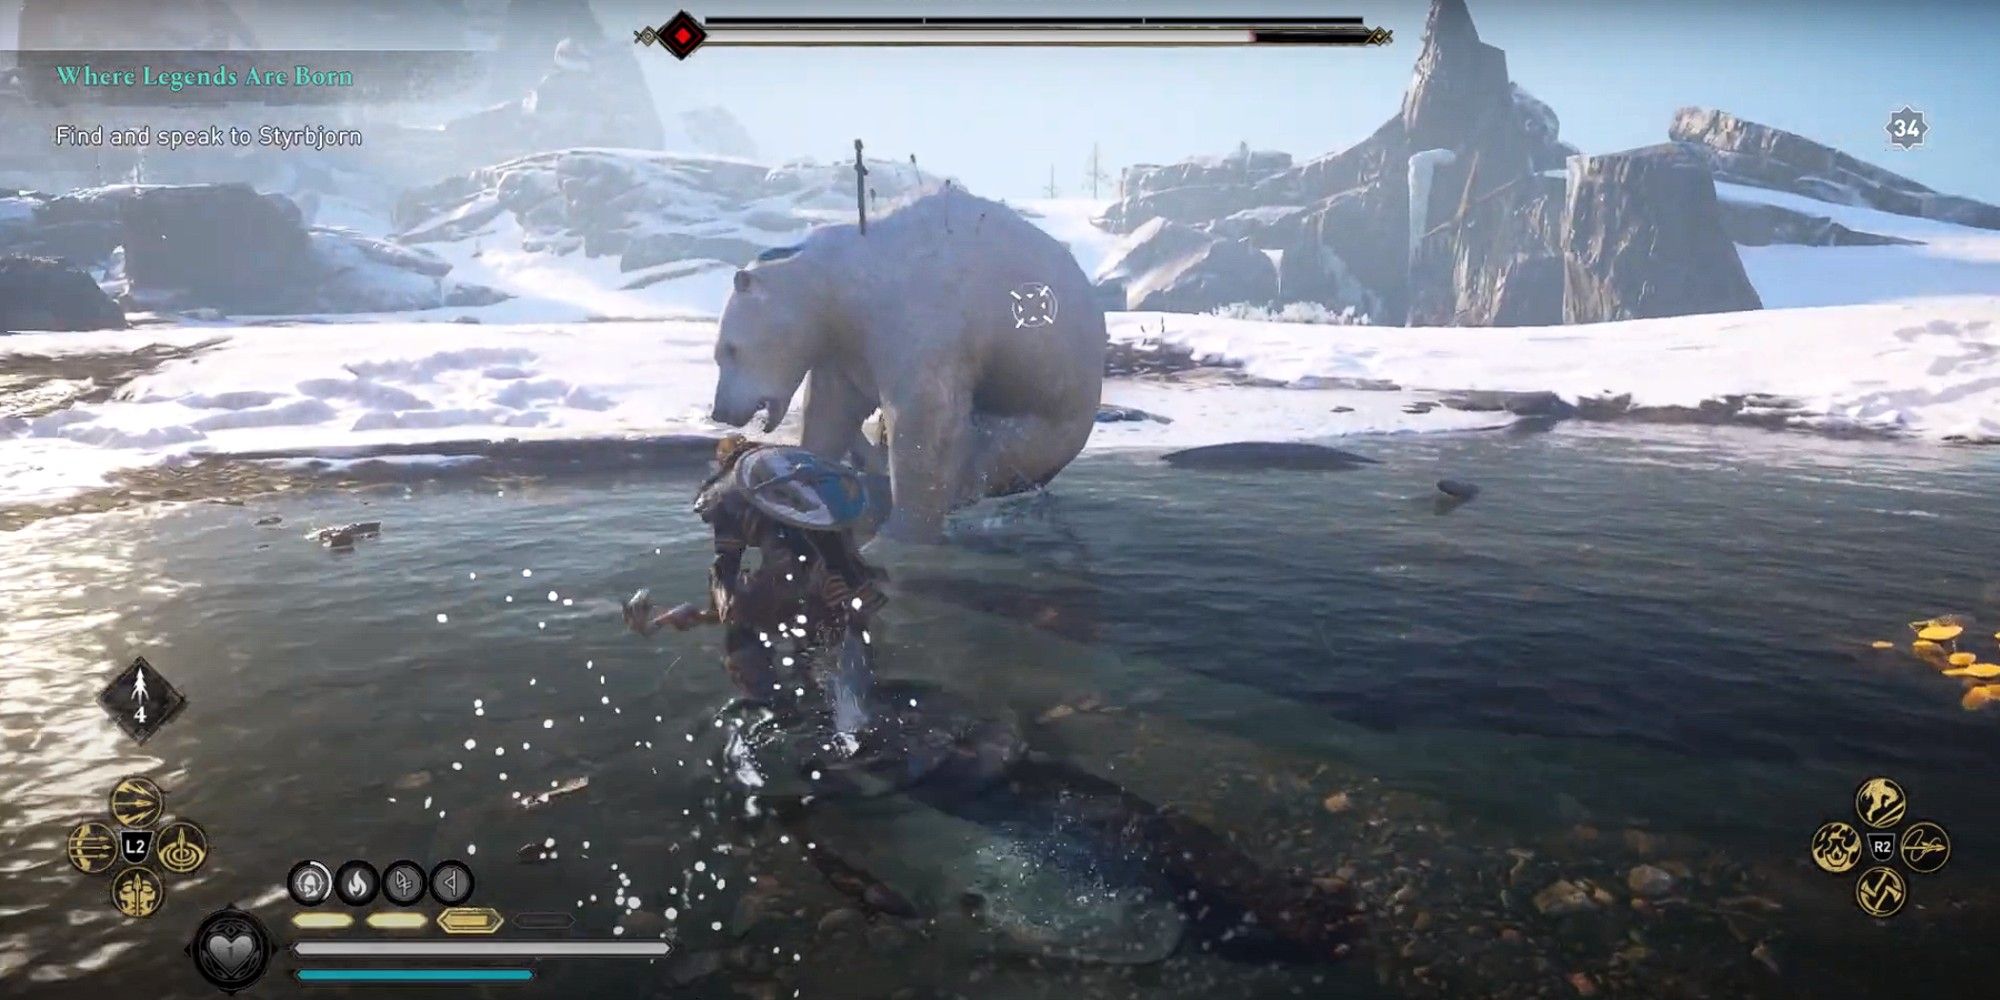 How To Find The Legendary Bear Of Blue Waters In Assassins Creed Valhalla